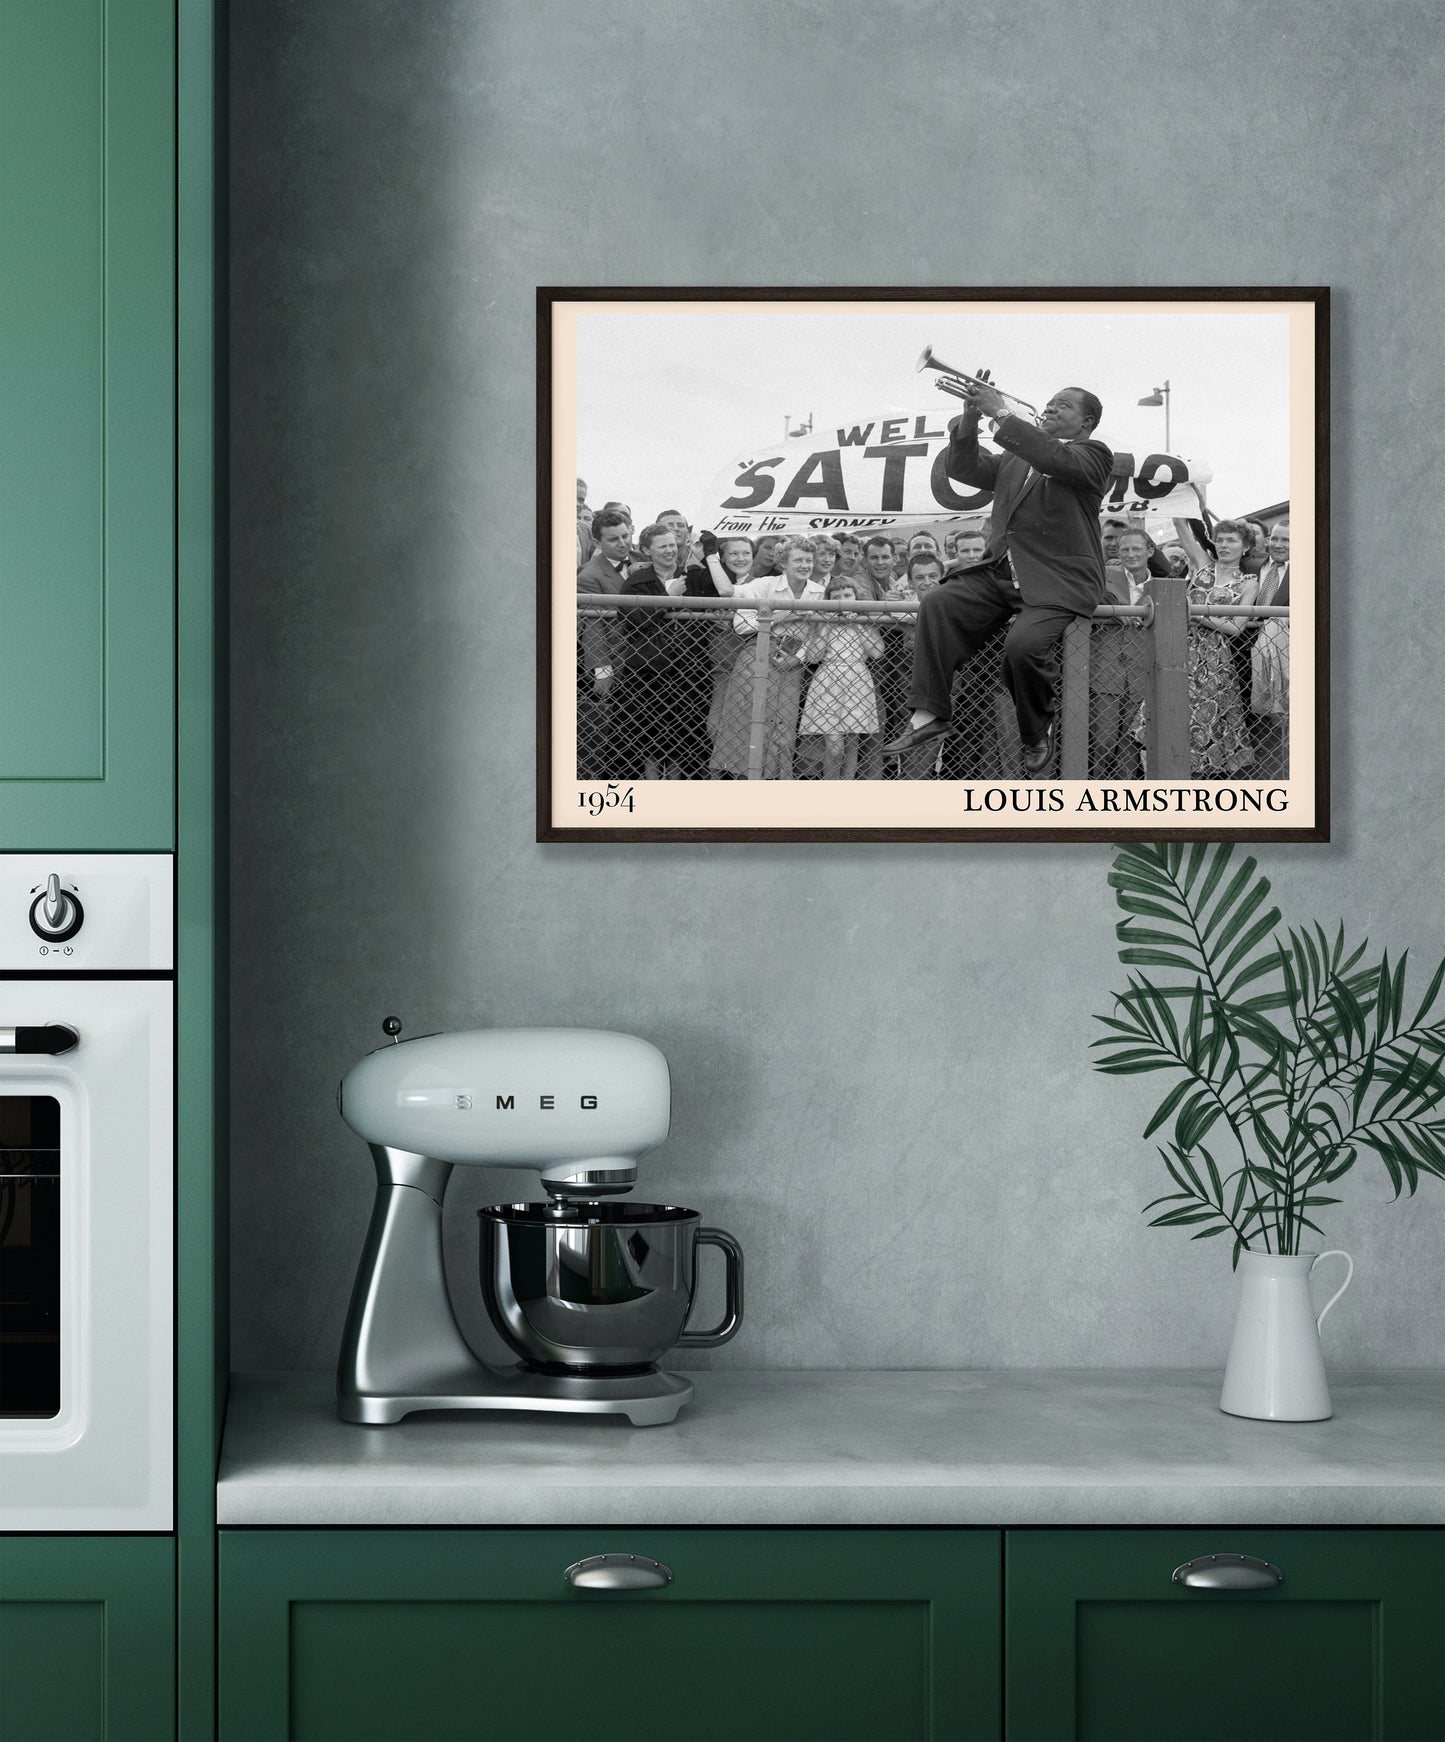 1954 picture of Louis Armstrong playing his trumpet sat on a fence. Picture crafted into a cool black framed music print, with an off-white border. Poster is hanging on a grey kitchen wall.